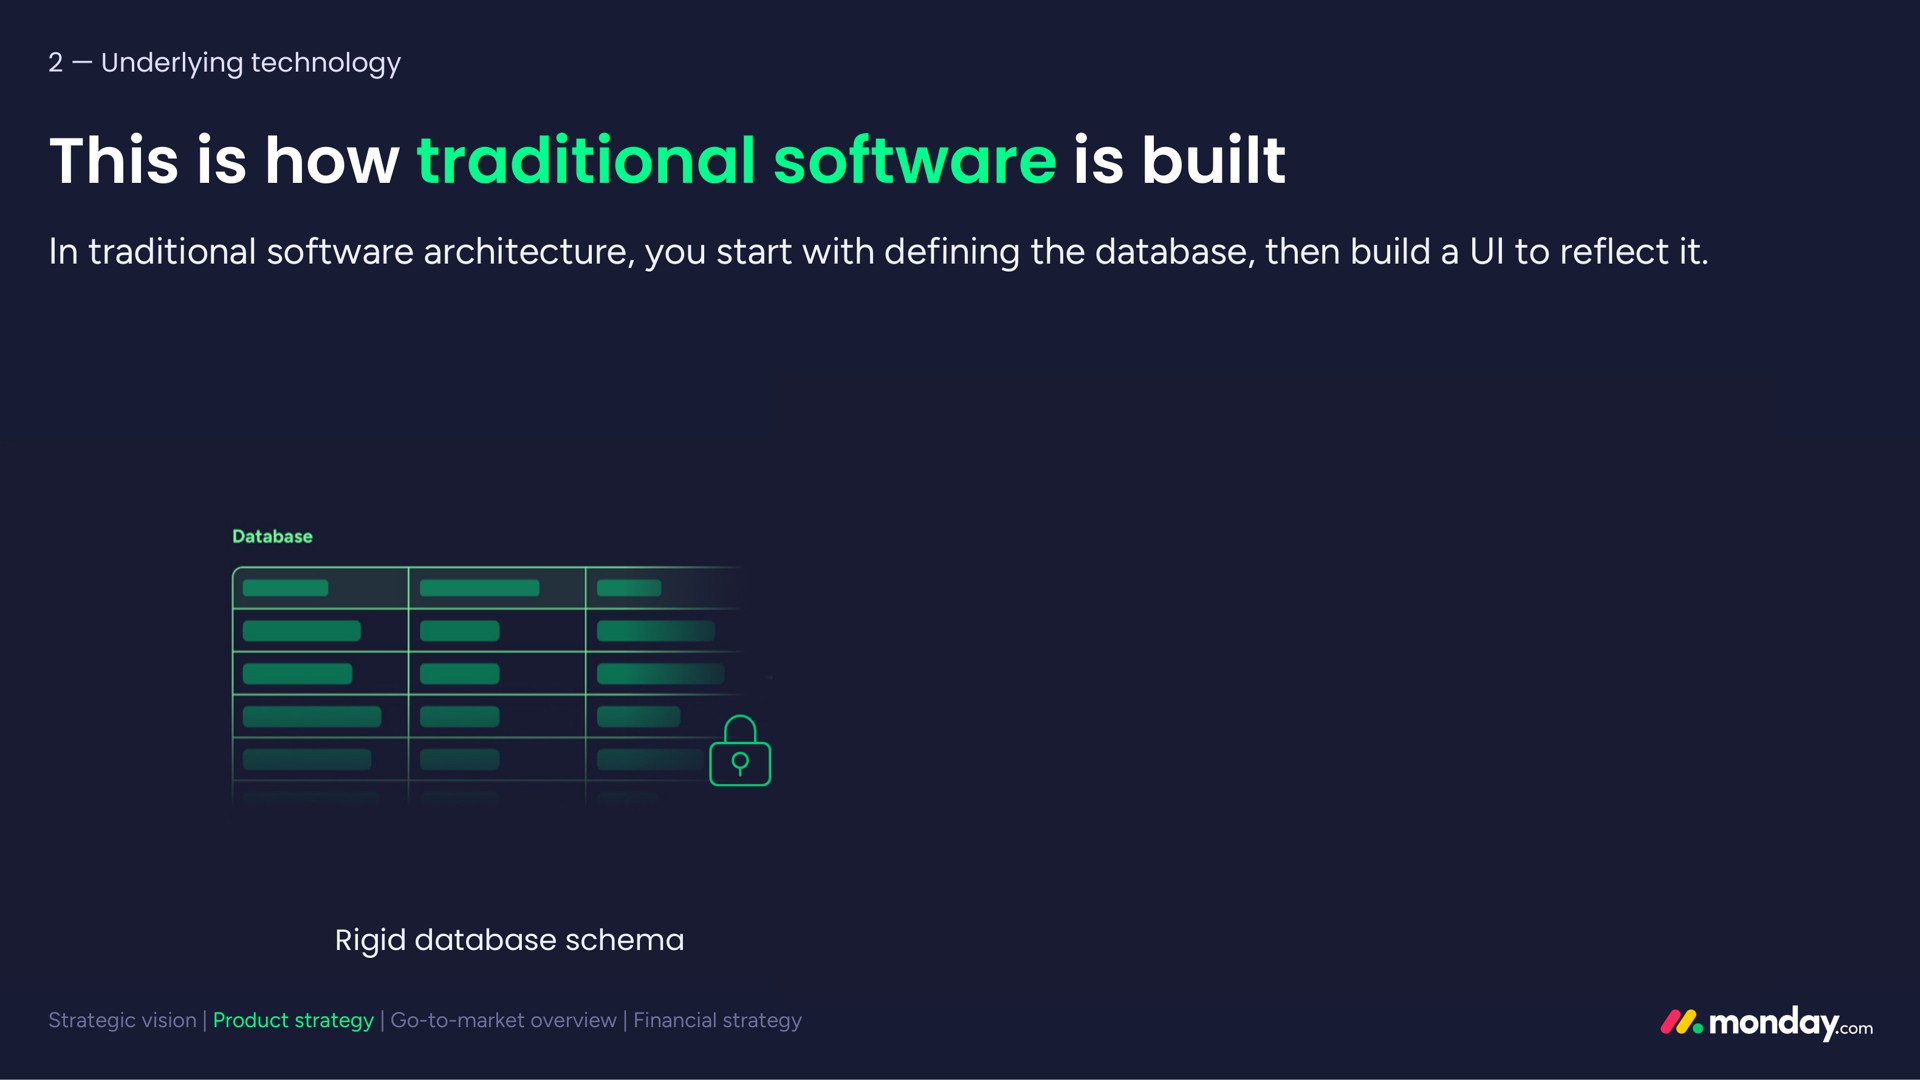 this is how traditional is built ray | monday.com